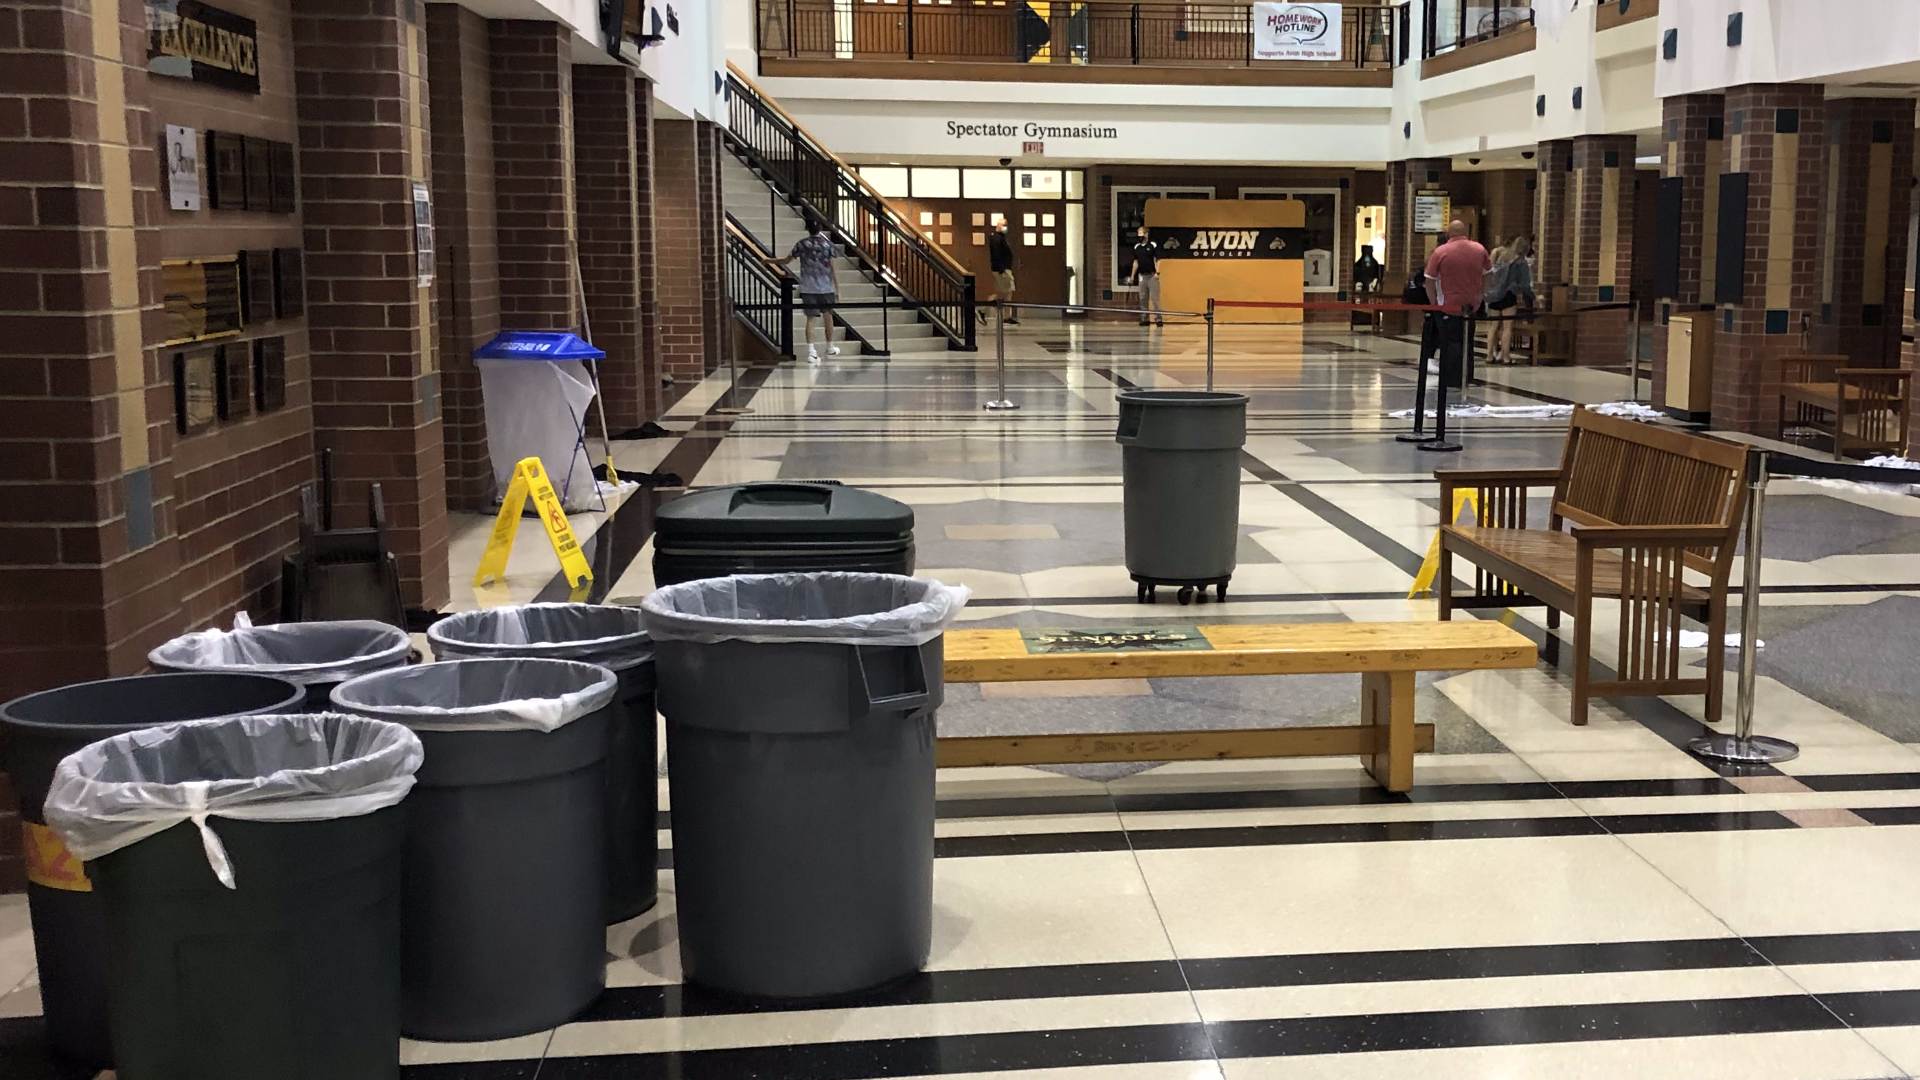 Avon High School had water raining down from the ceiling Wednesday after strong storms passed through central Indiana.